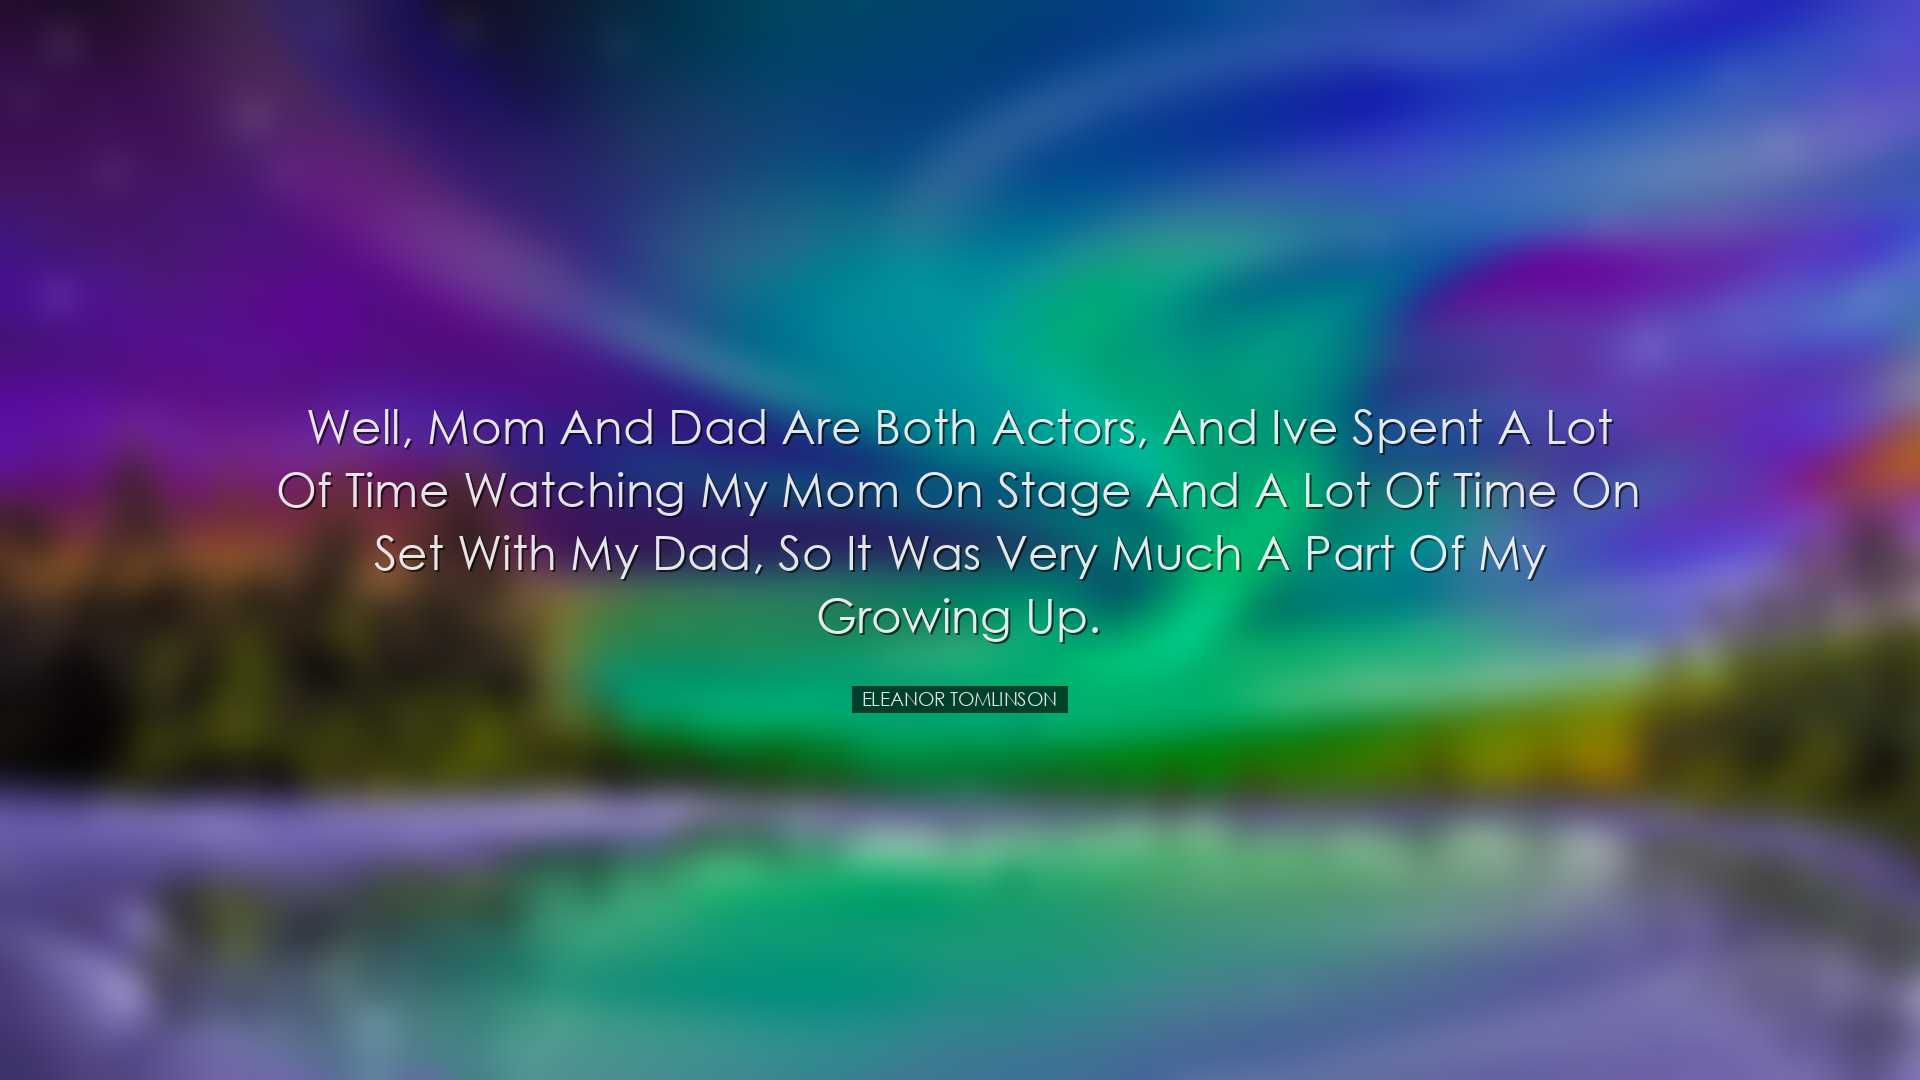 Well, Mom and Dad are both actors, and Ive spent a lot of time wat